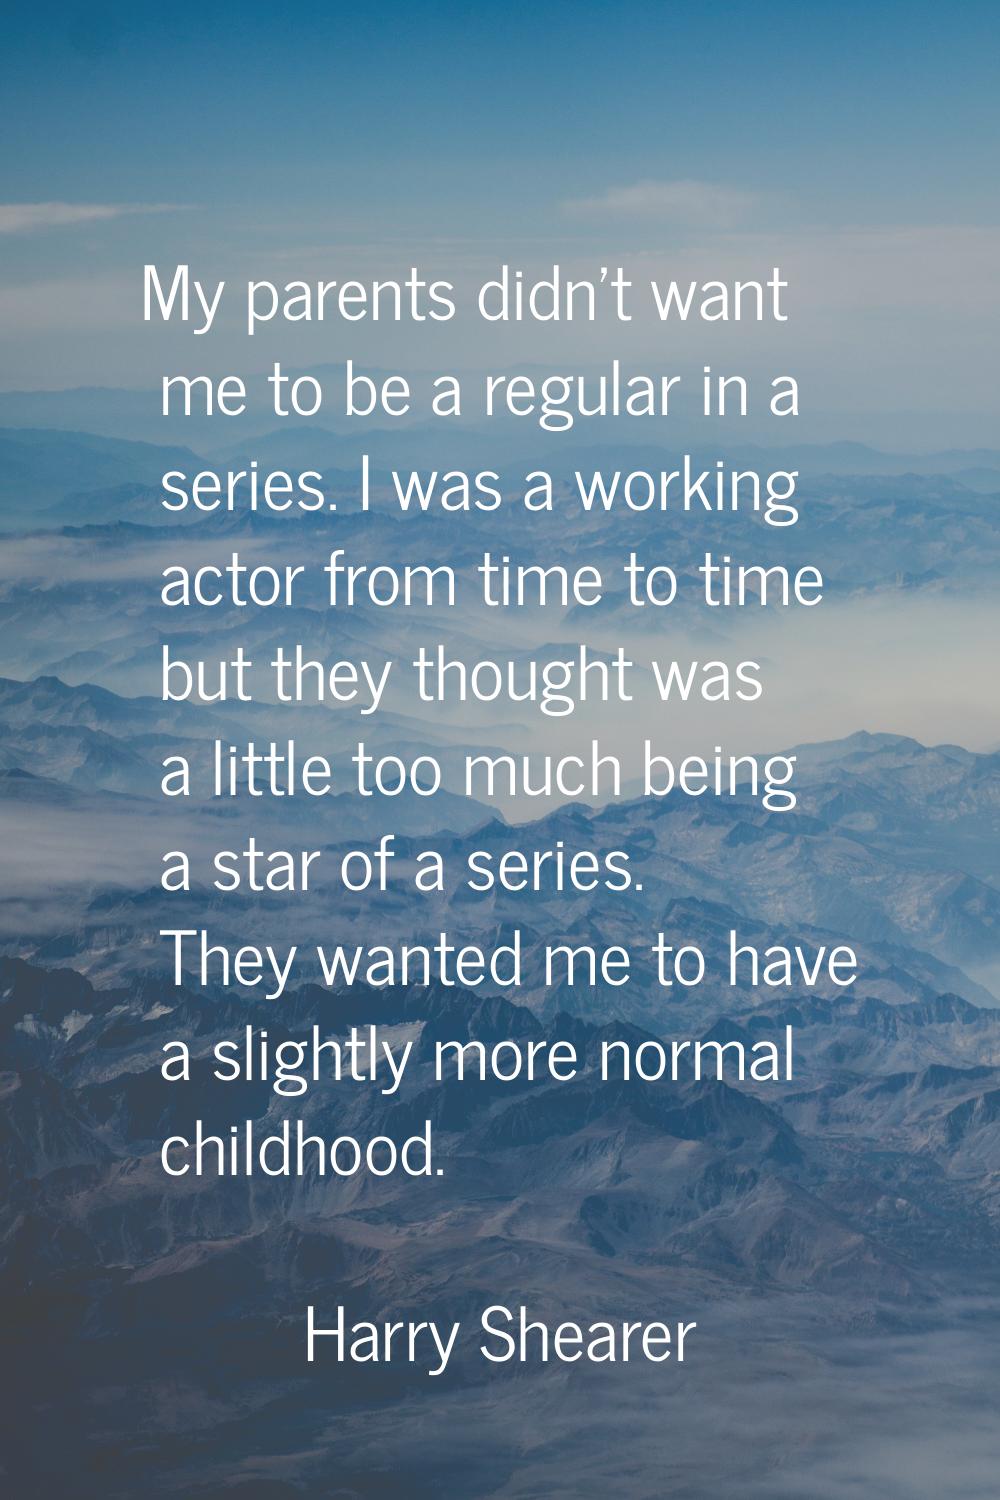 My parents didn't want me to be a regular in a series. I was a working actor from time to time but 